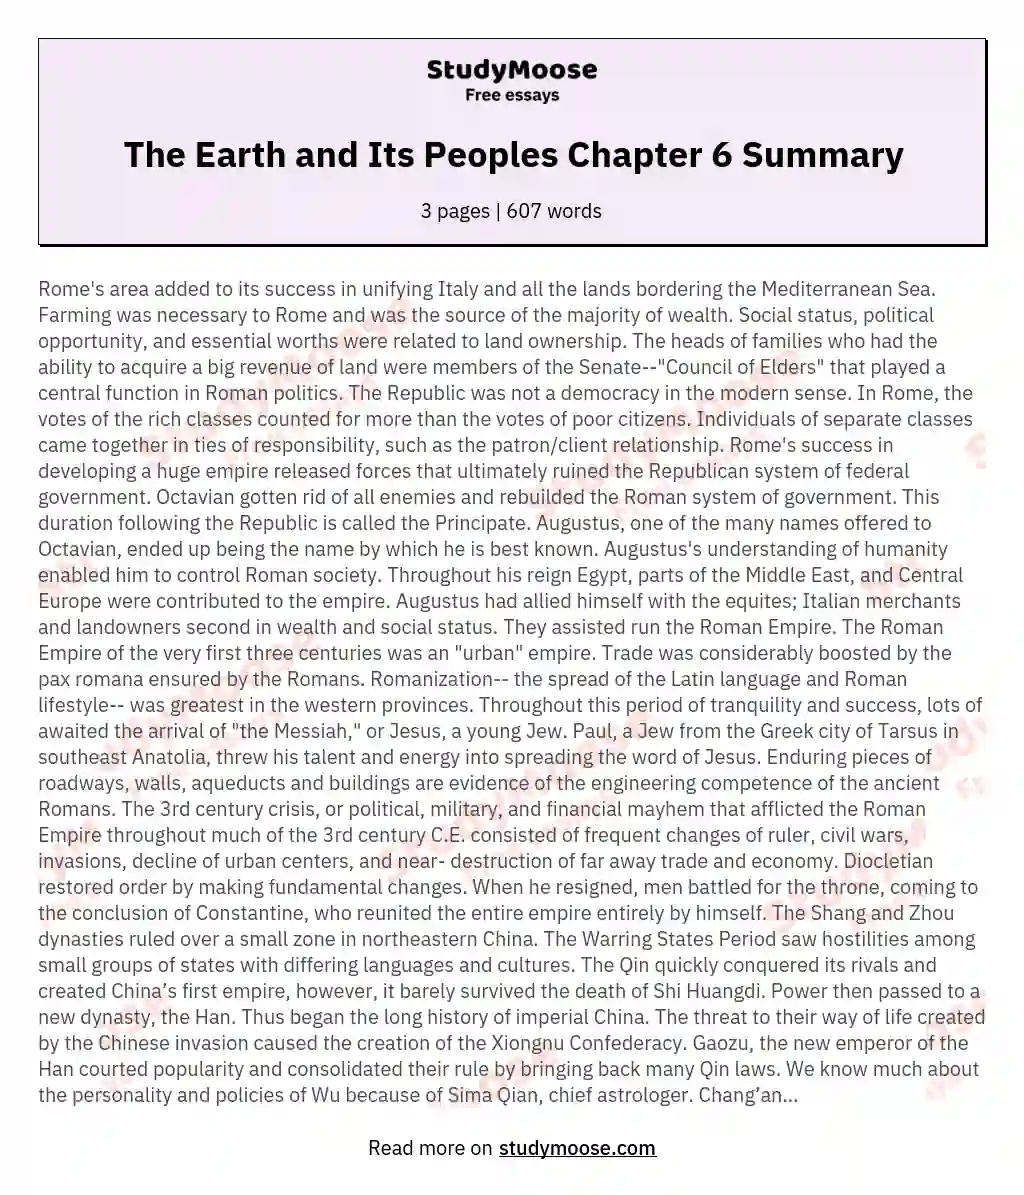 The Earth and Its Peoples Chapter 6 Summary essay